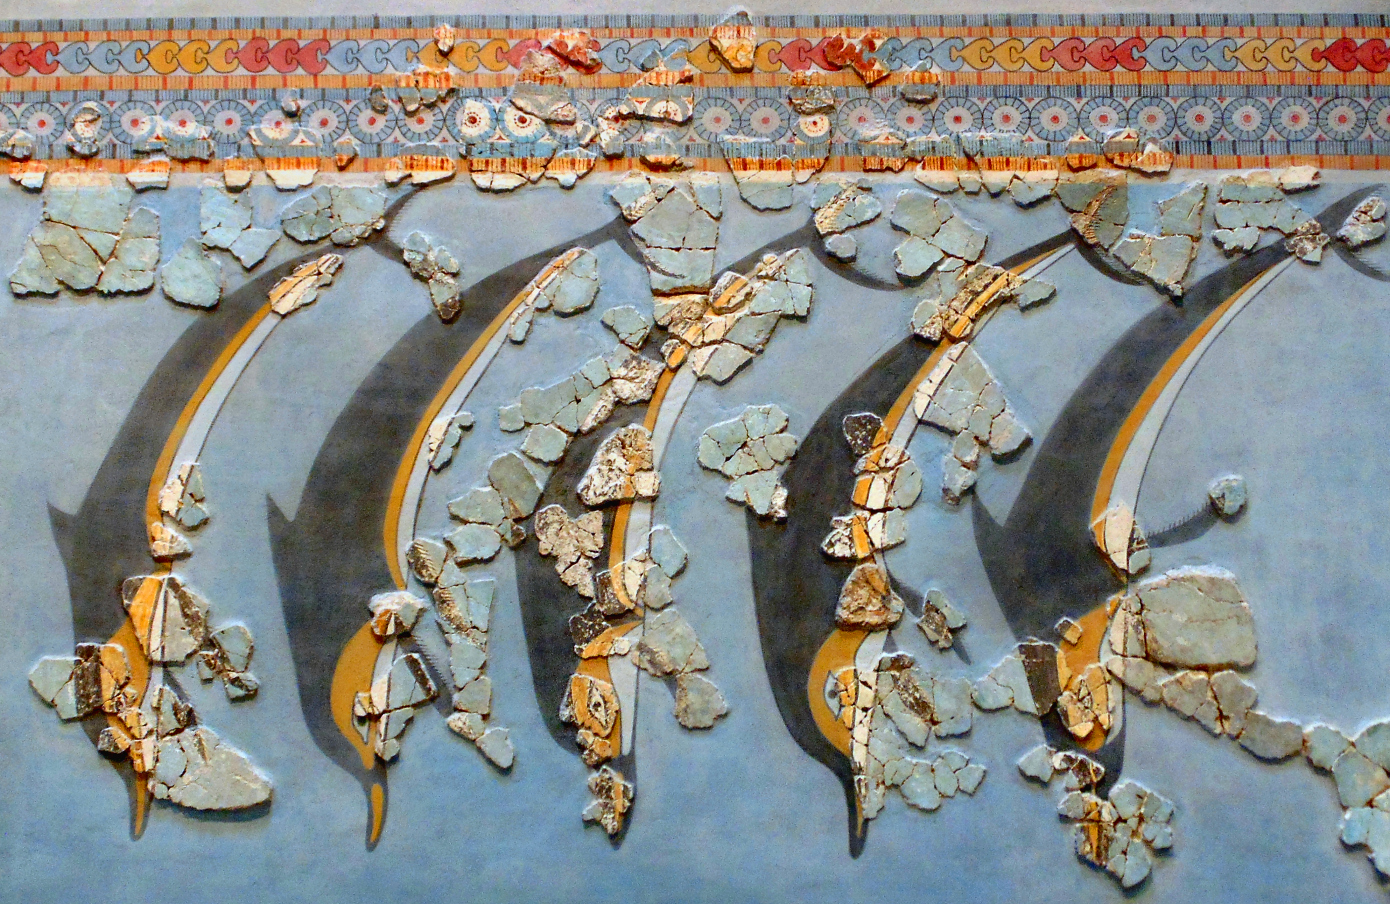 Five dolphins with their heads pointed downwards and tails pointed upwards